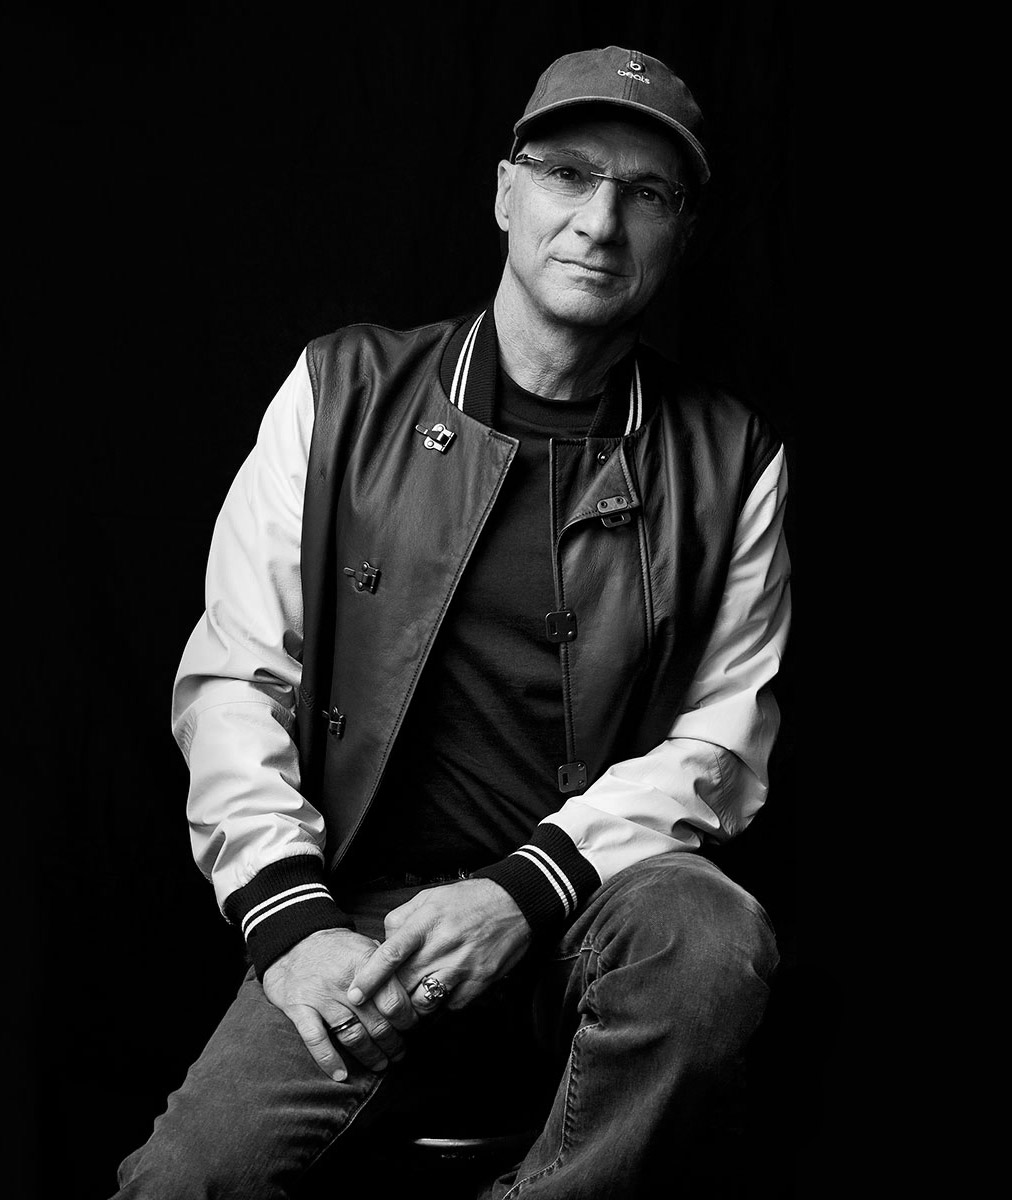 Jimmy Iovine sitting on a stool in black and white